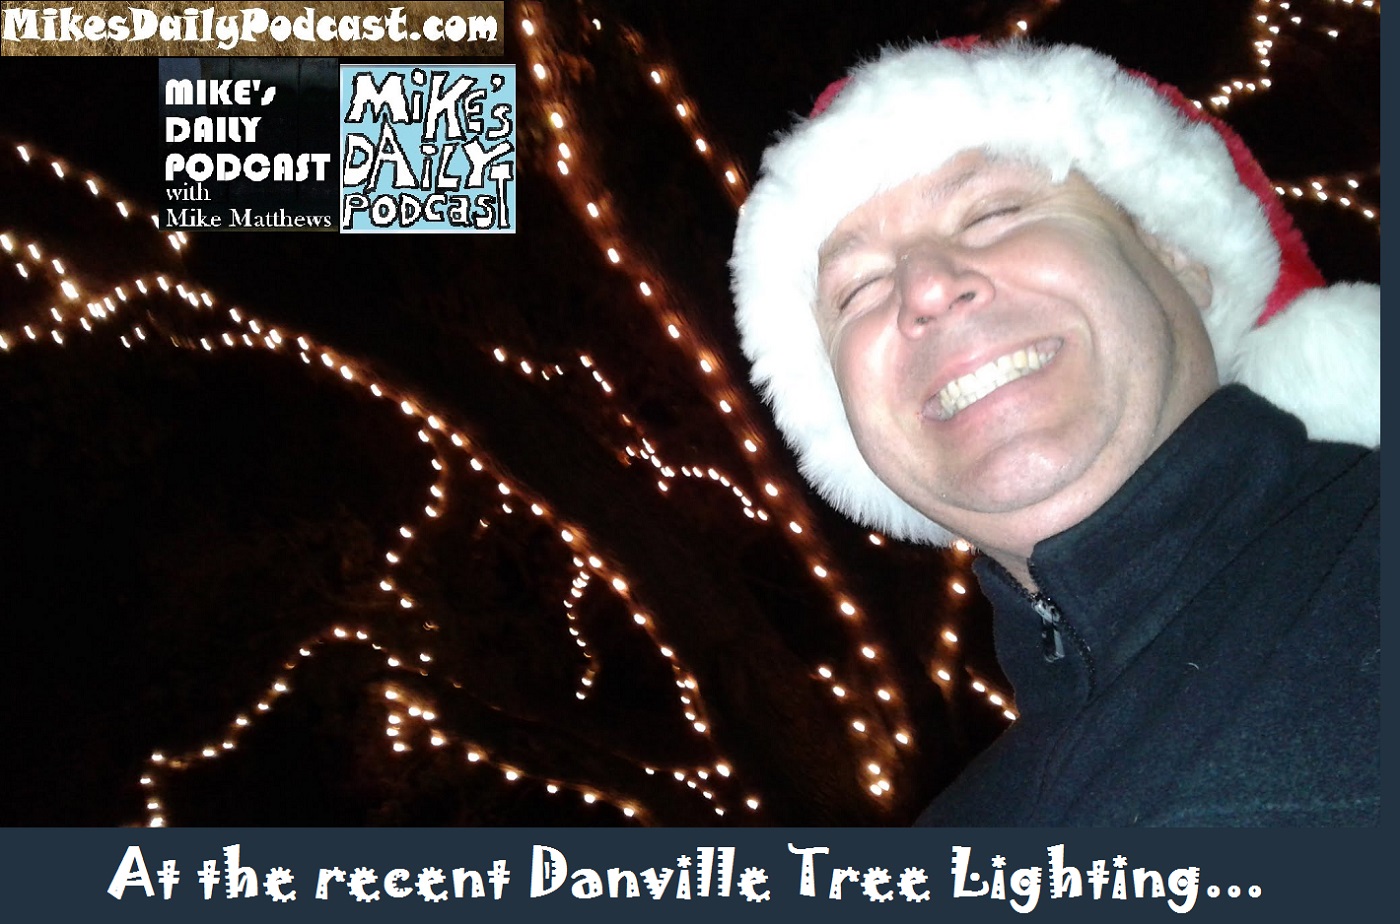 mikes-daily-podcast-1229-danville-tree-lighting-ceremony